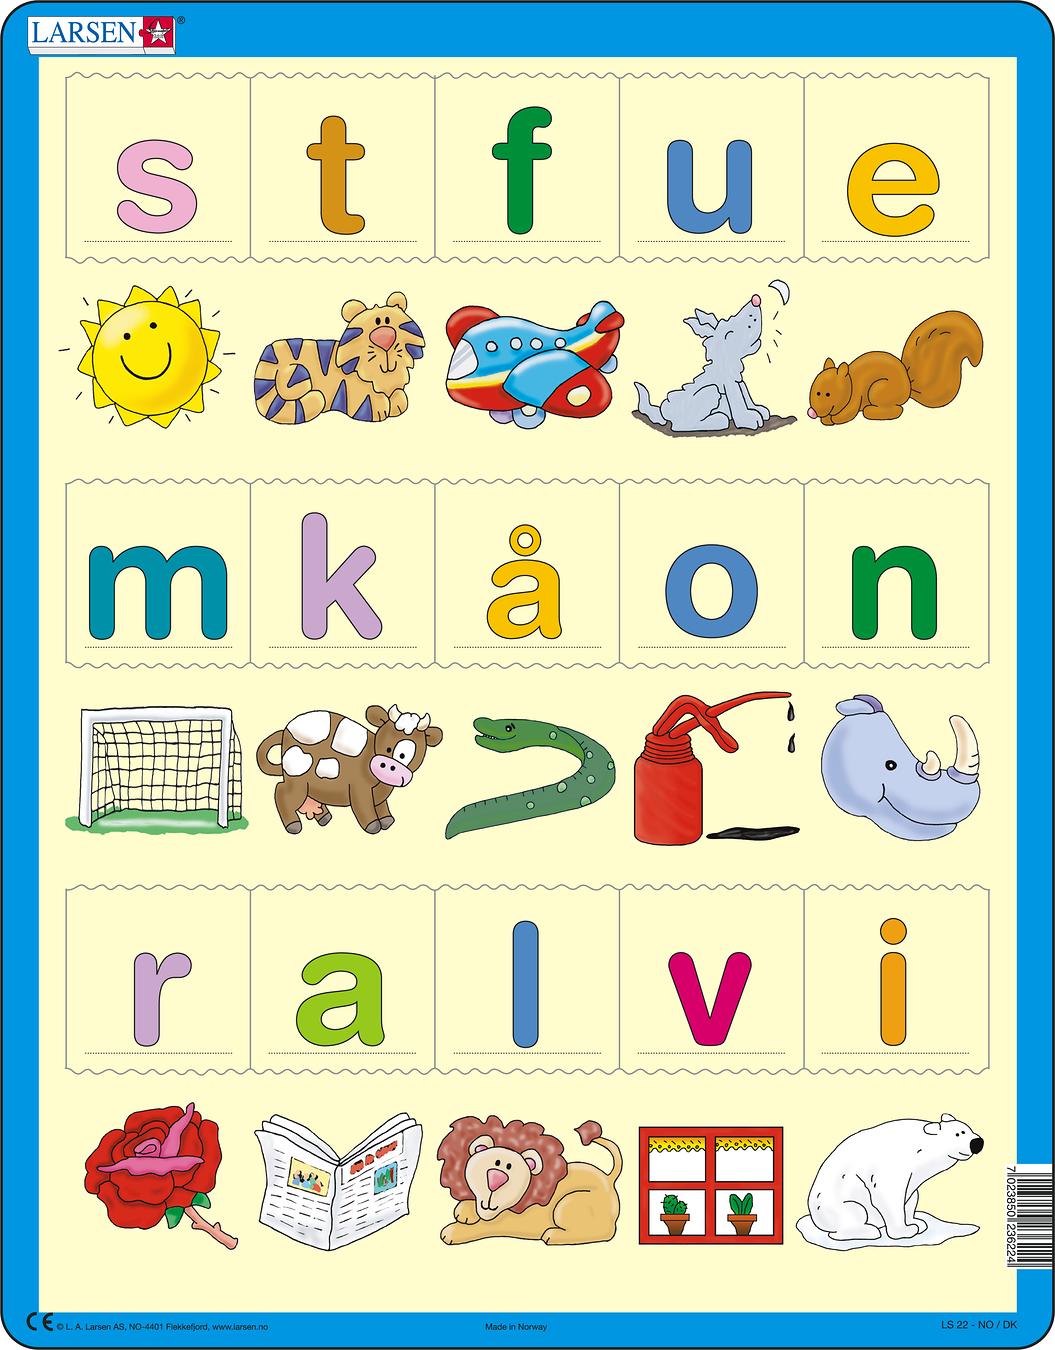 LS22 - Learn the letters (lower cases) :: Reading :: Puzzles :: Larsen ...